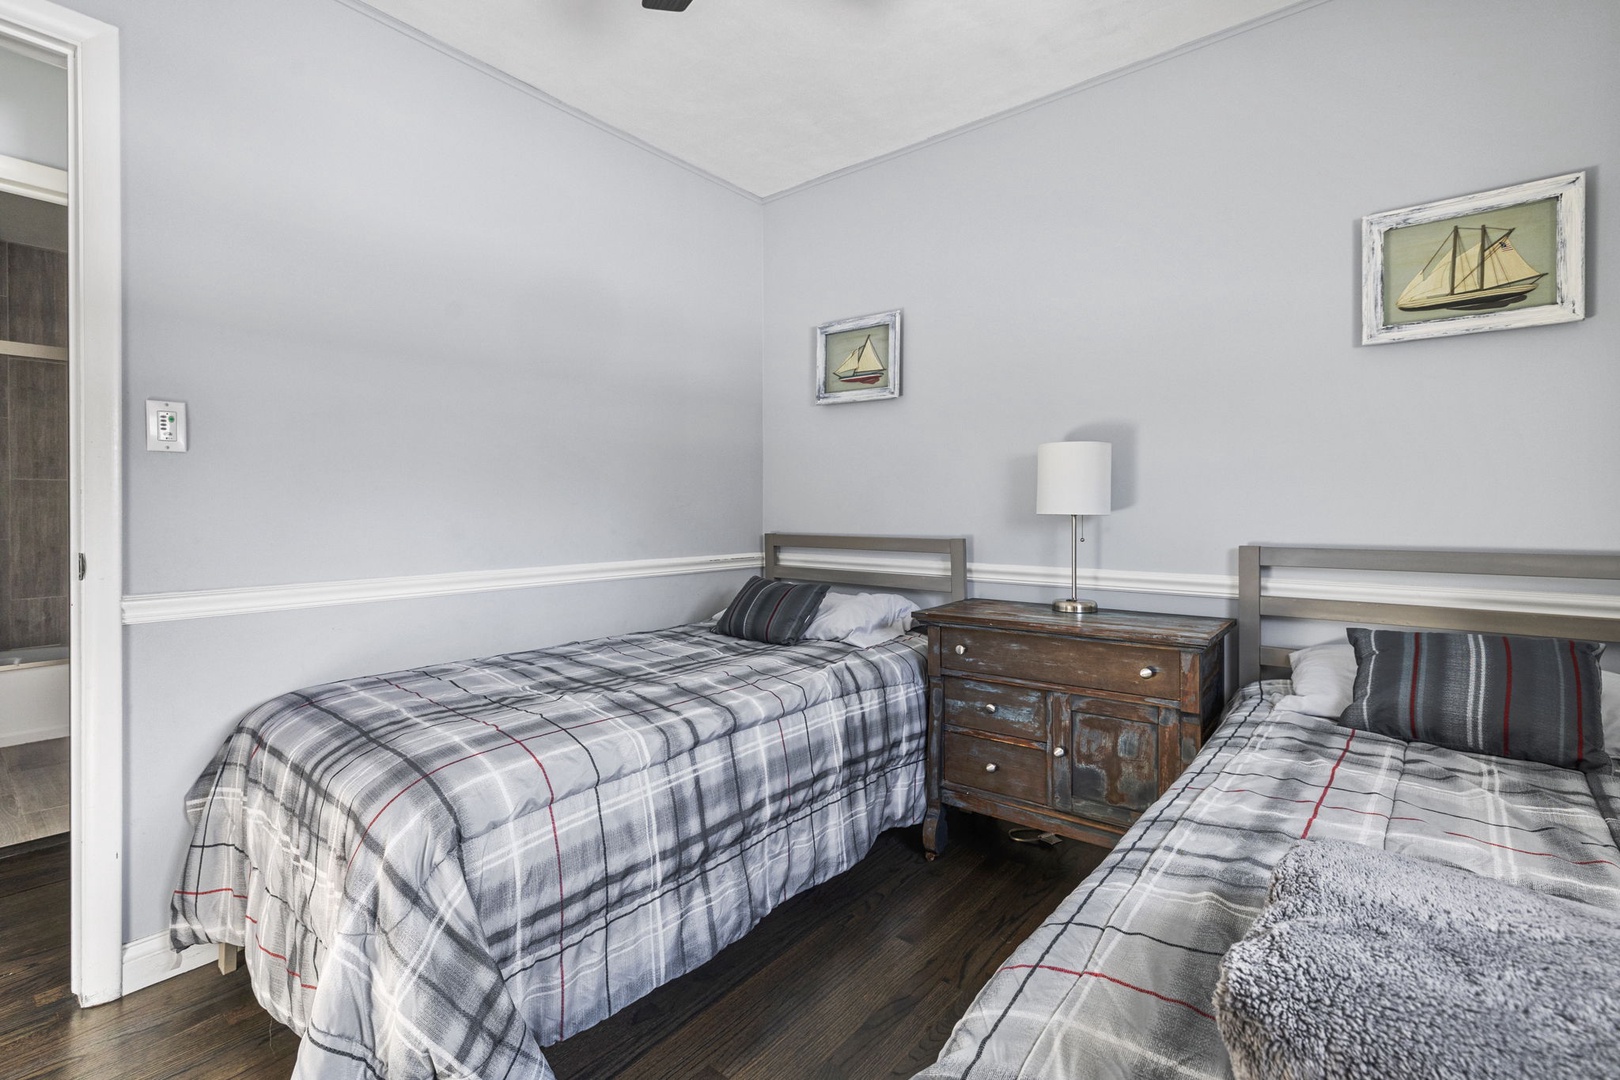 This sweetly-appointed bedroom features two super-comfy single beds.